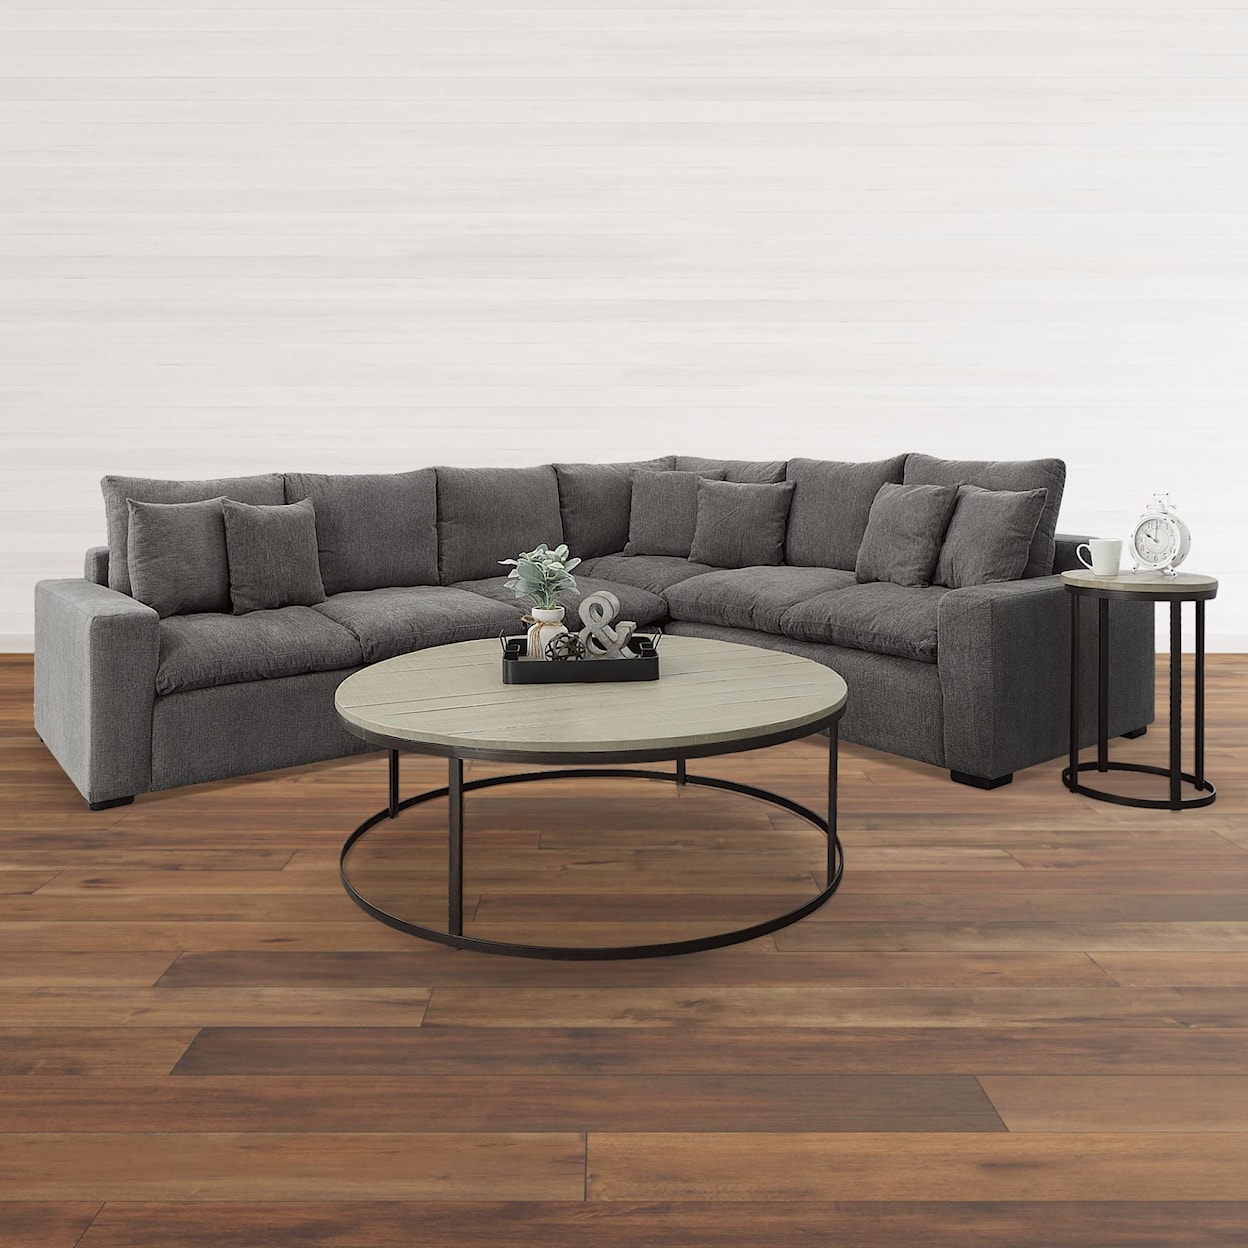 Elements International Frederick Natural Natural Round Coffee Table